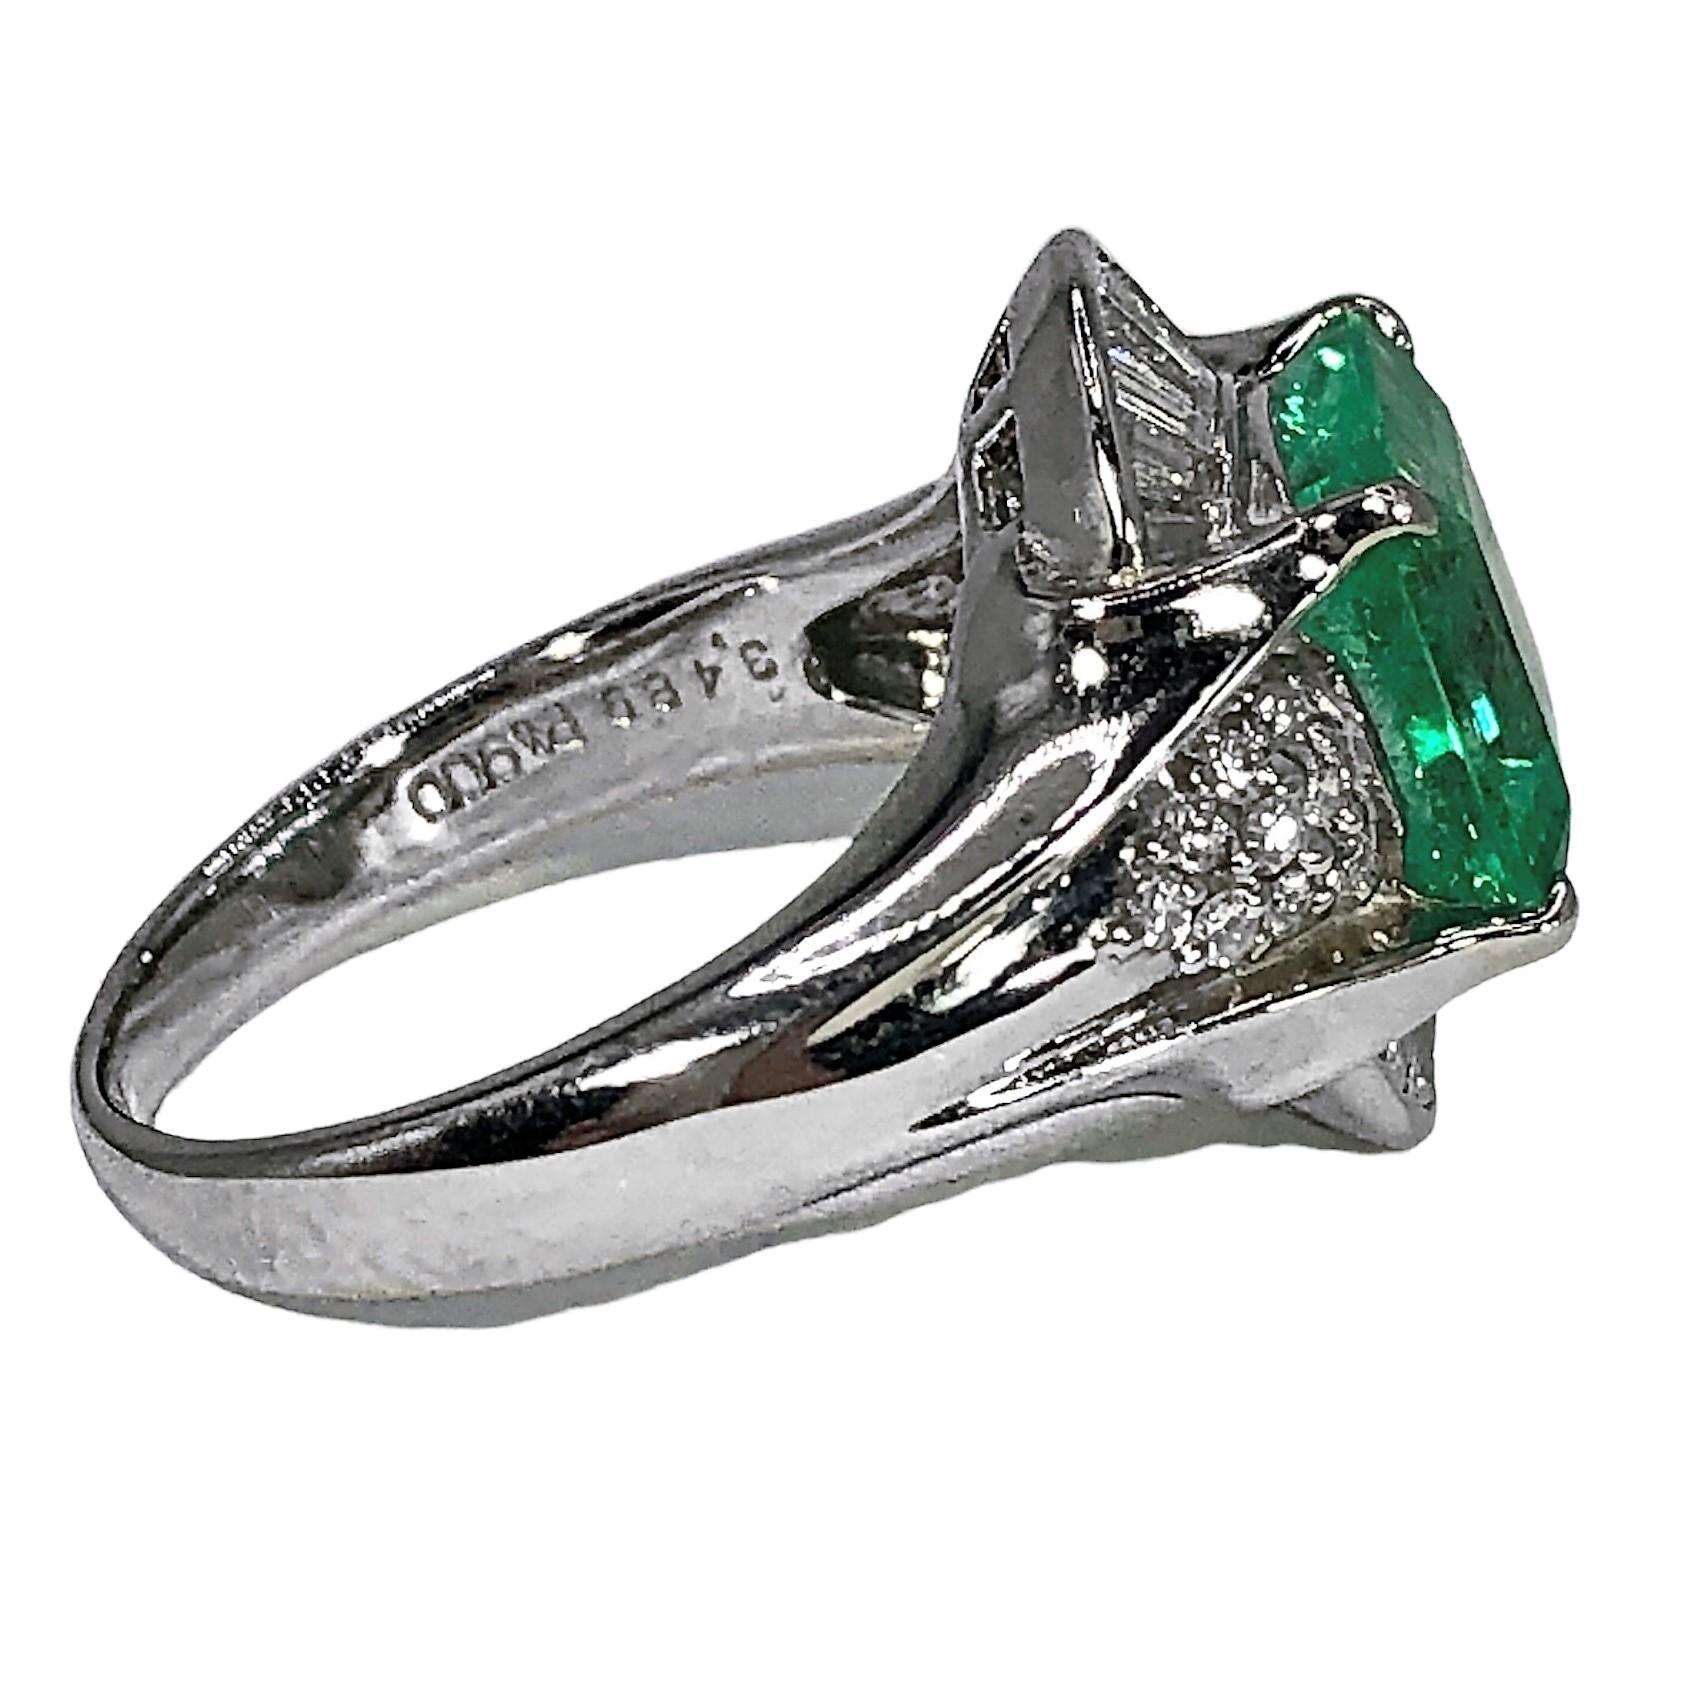 Emerald Cut Contemporary Platinum Ring with 3.48ct Emerald and Diamonds